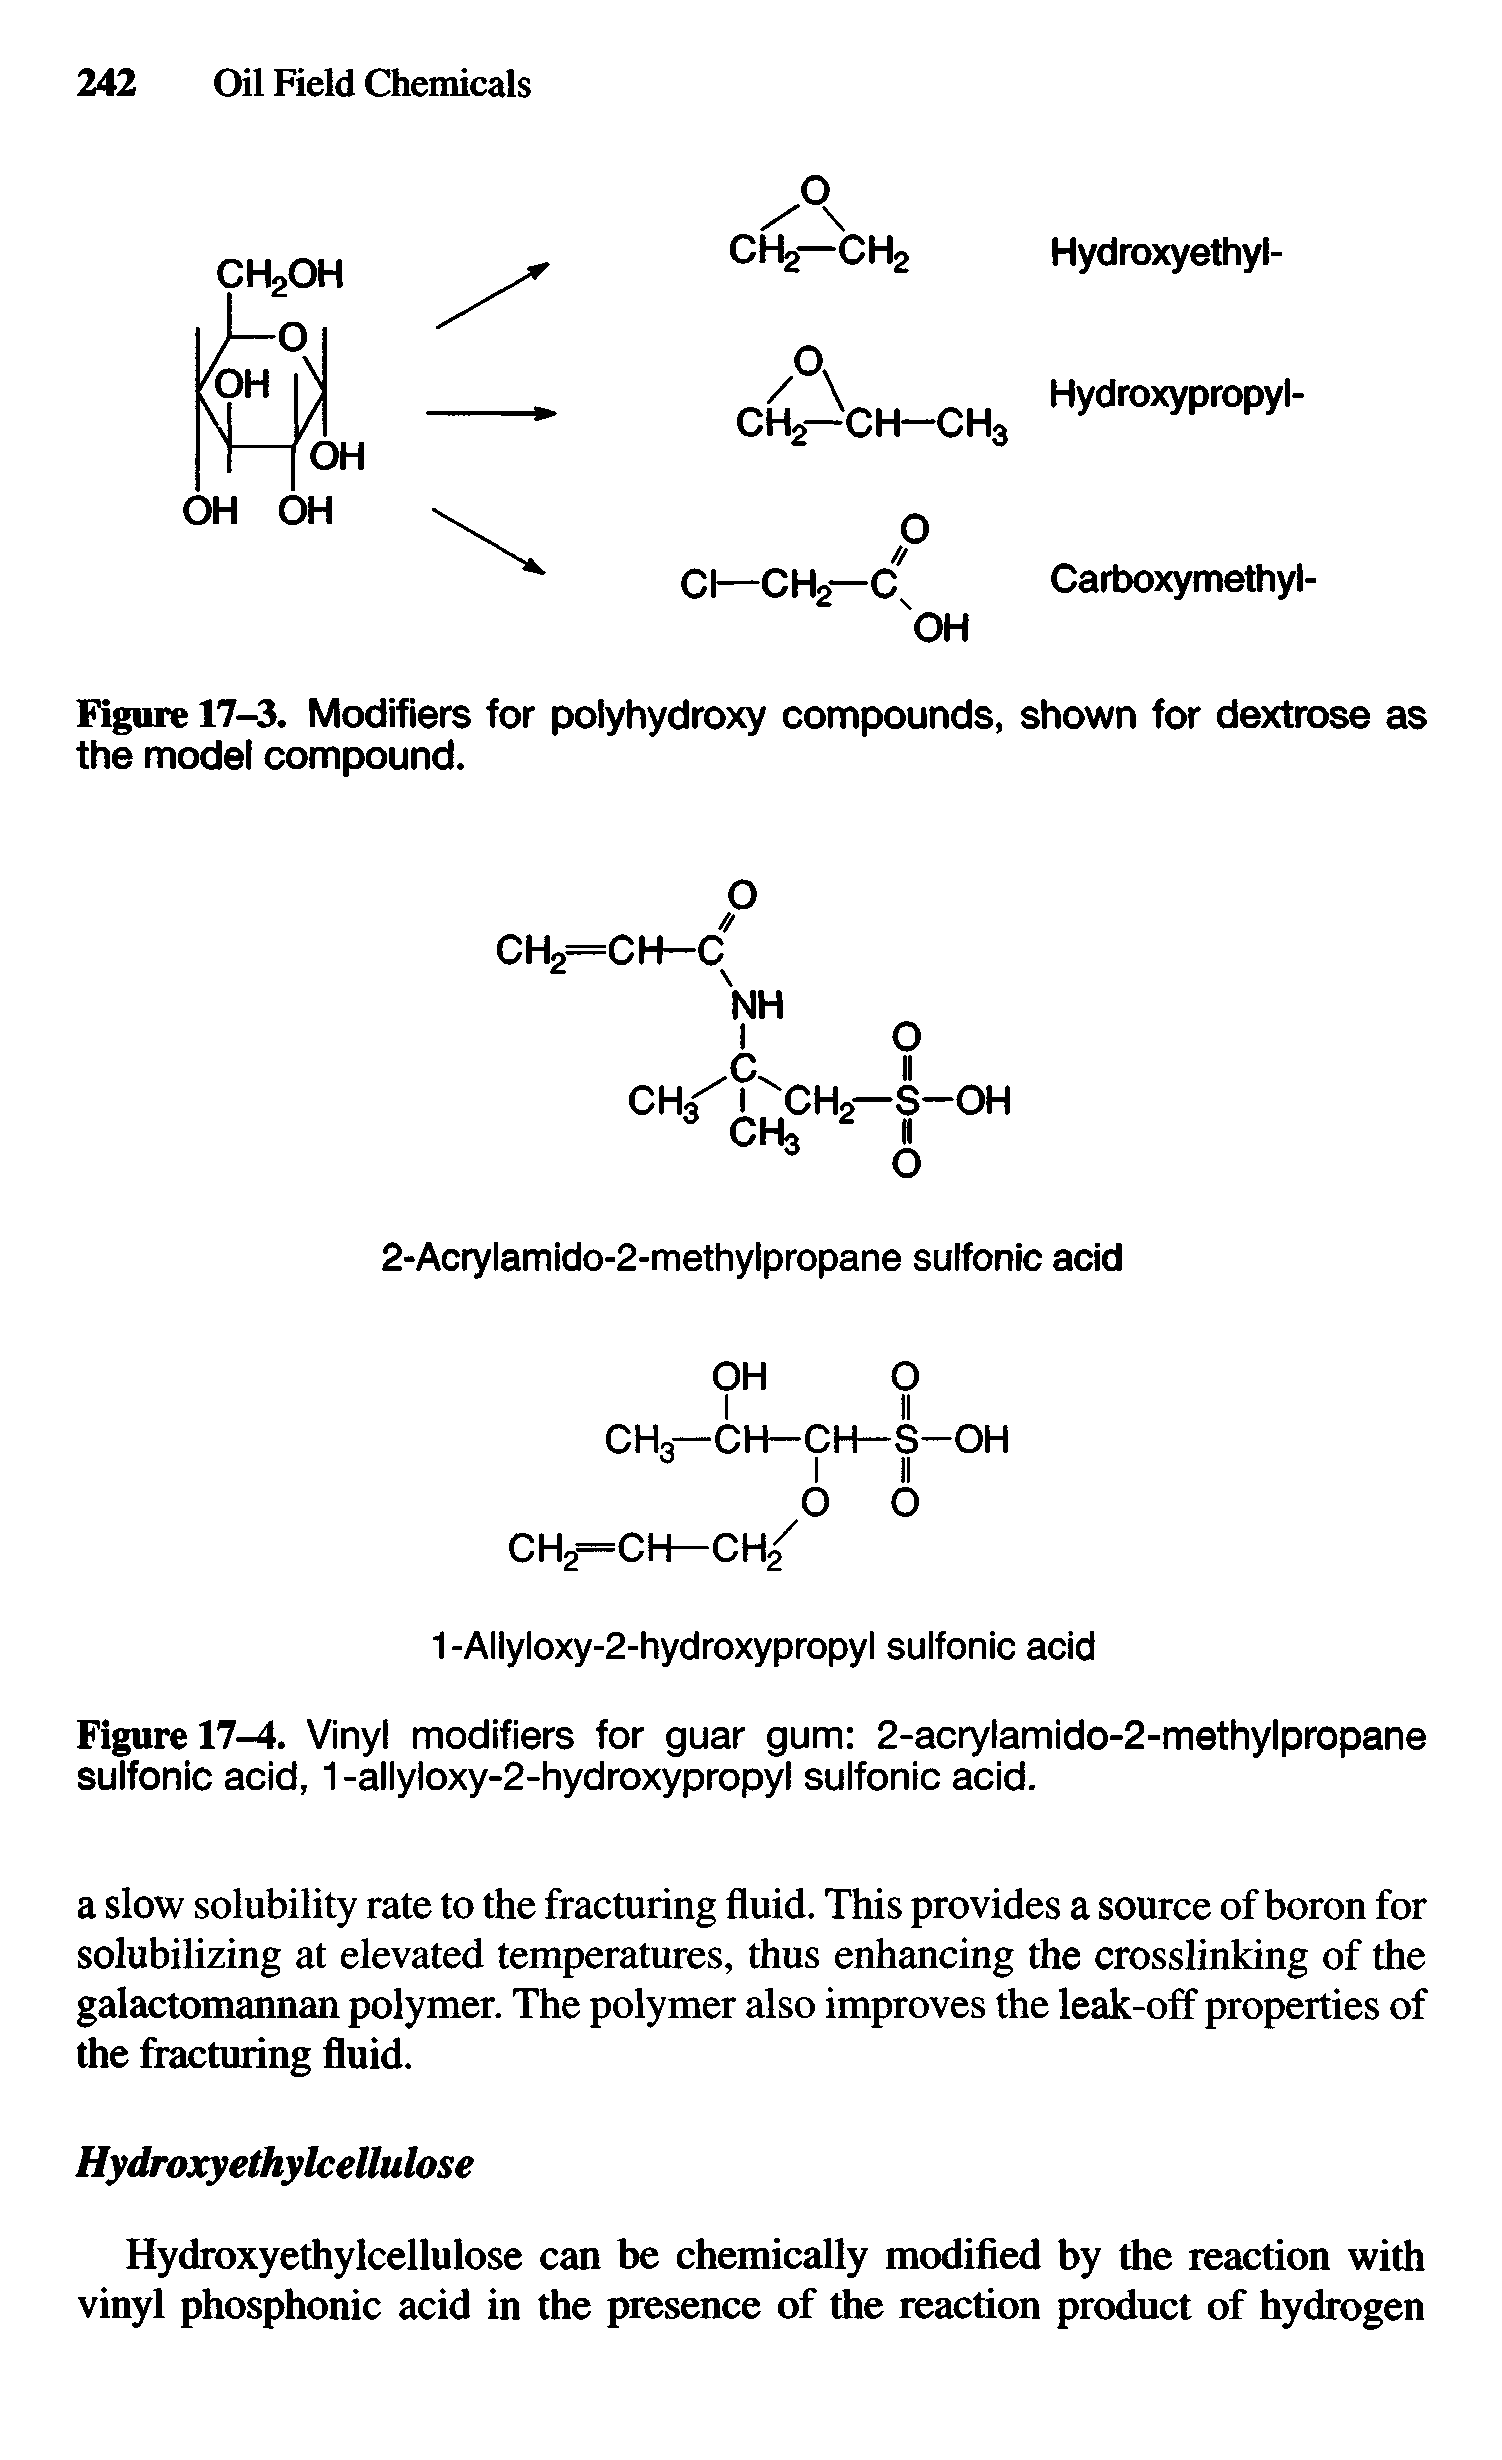 Figure 17-3. Modifiers for polyhydroxy compounds, shown for dextrose as the model compound.